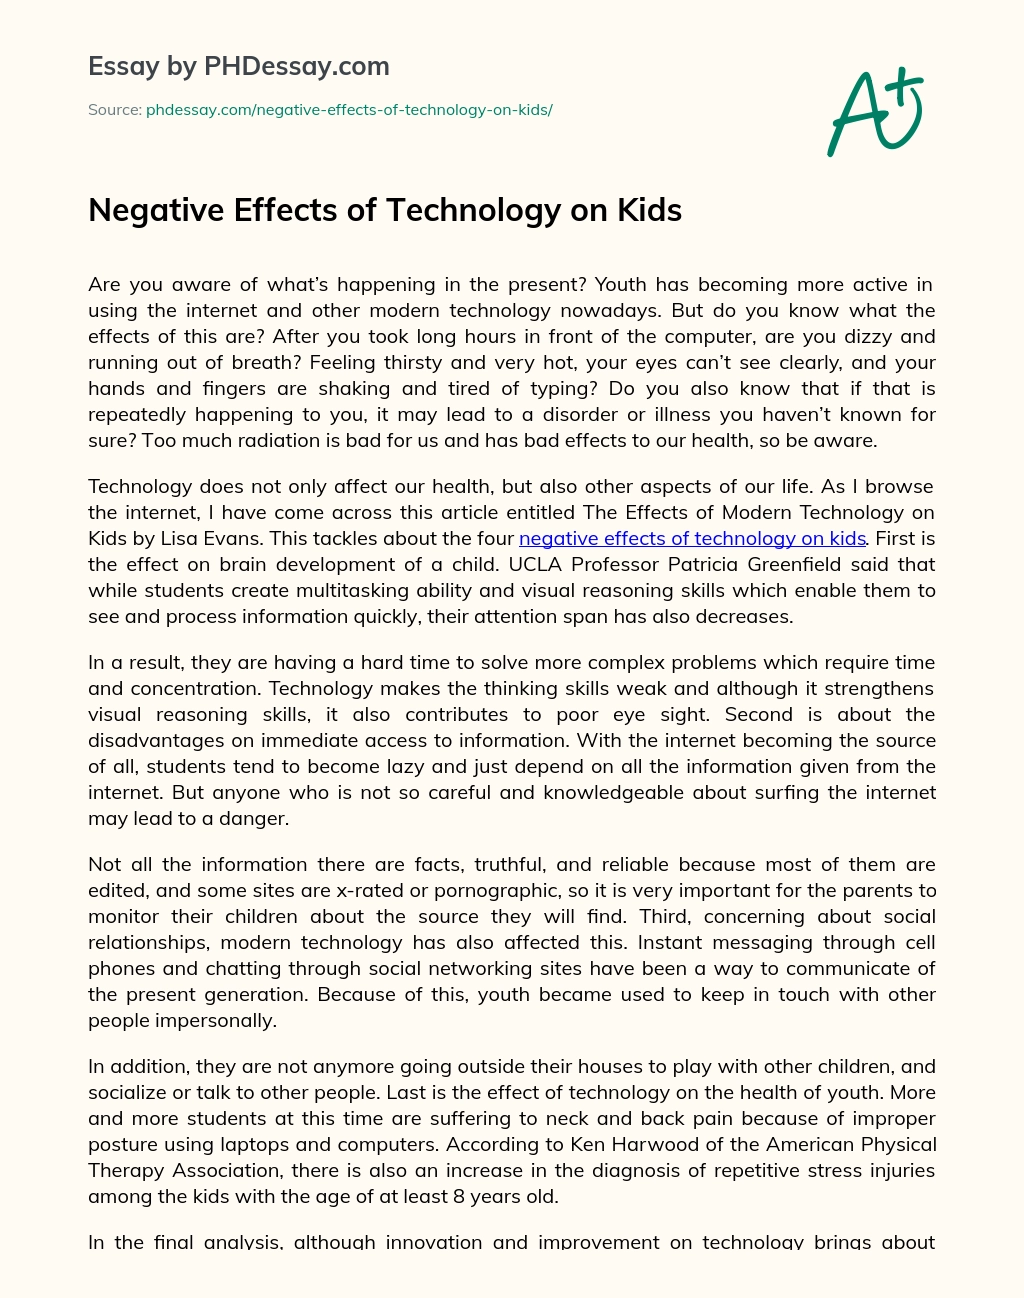 negative effects of technology essay